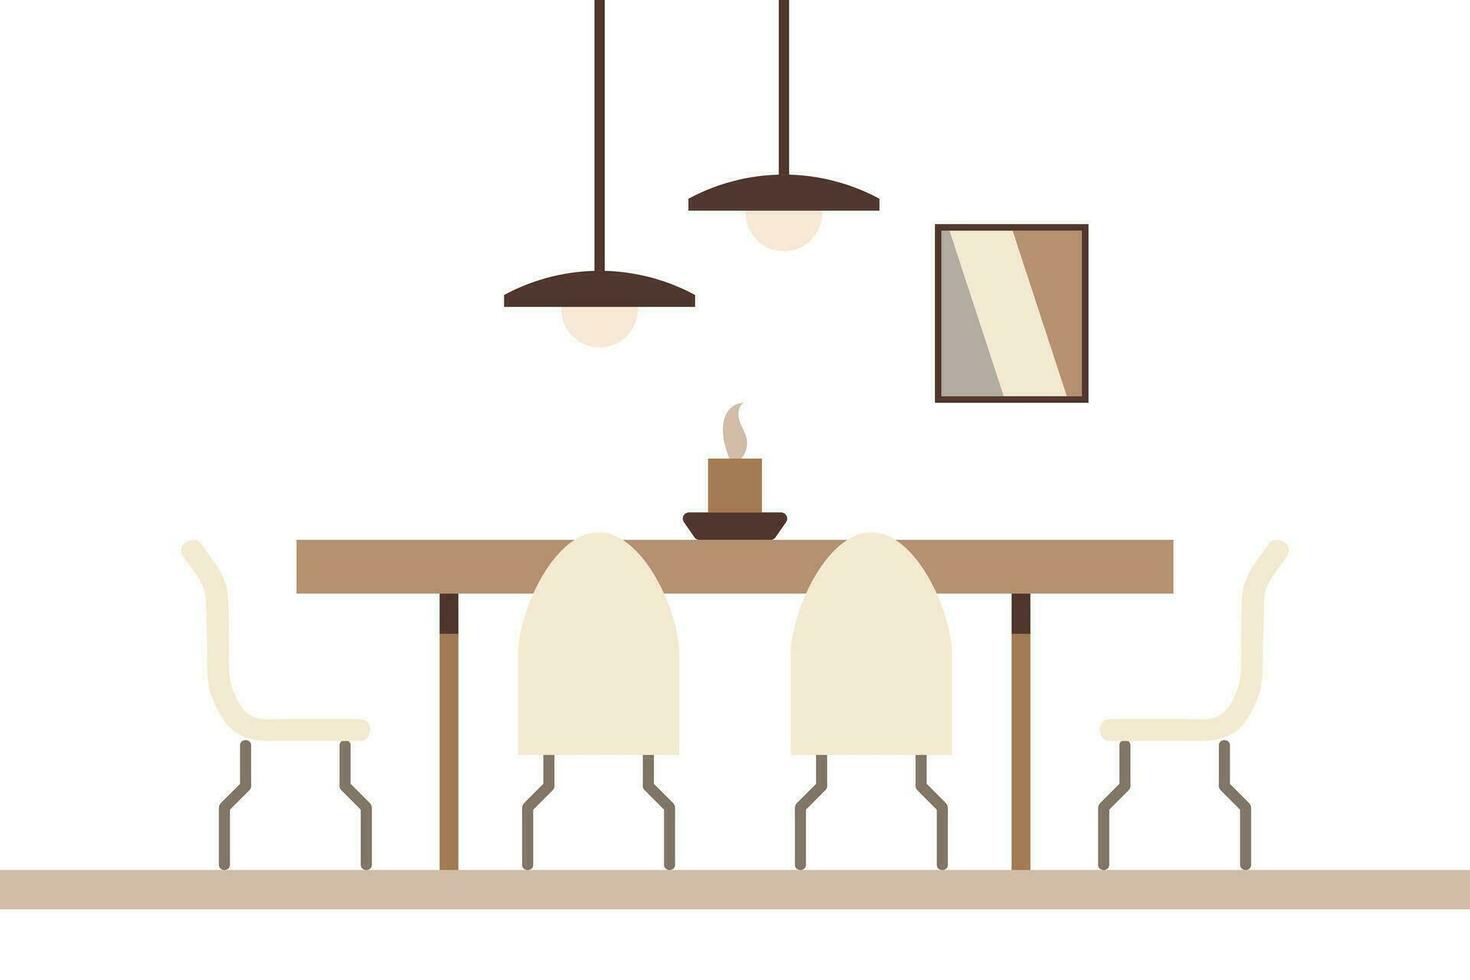 Dining table in the kitchen with chairs, a candle on the table, a poster on the wall and modern lamps in lampshades. Flat interior in minimal style, vector